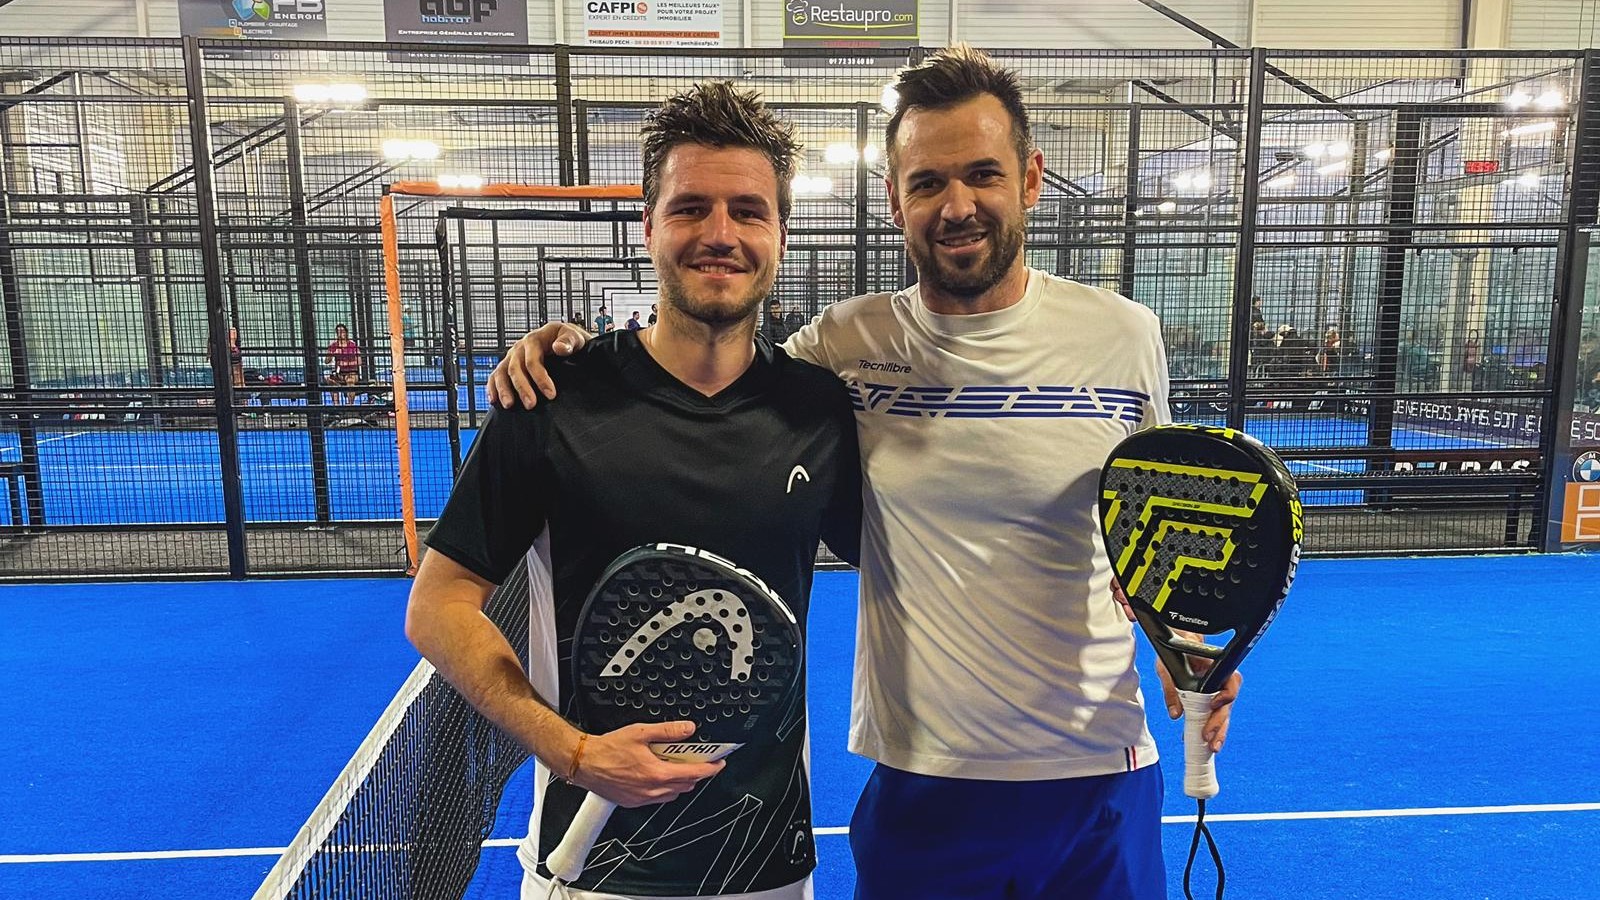 P1000 Toulouse Padel Club: the favorites in force